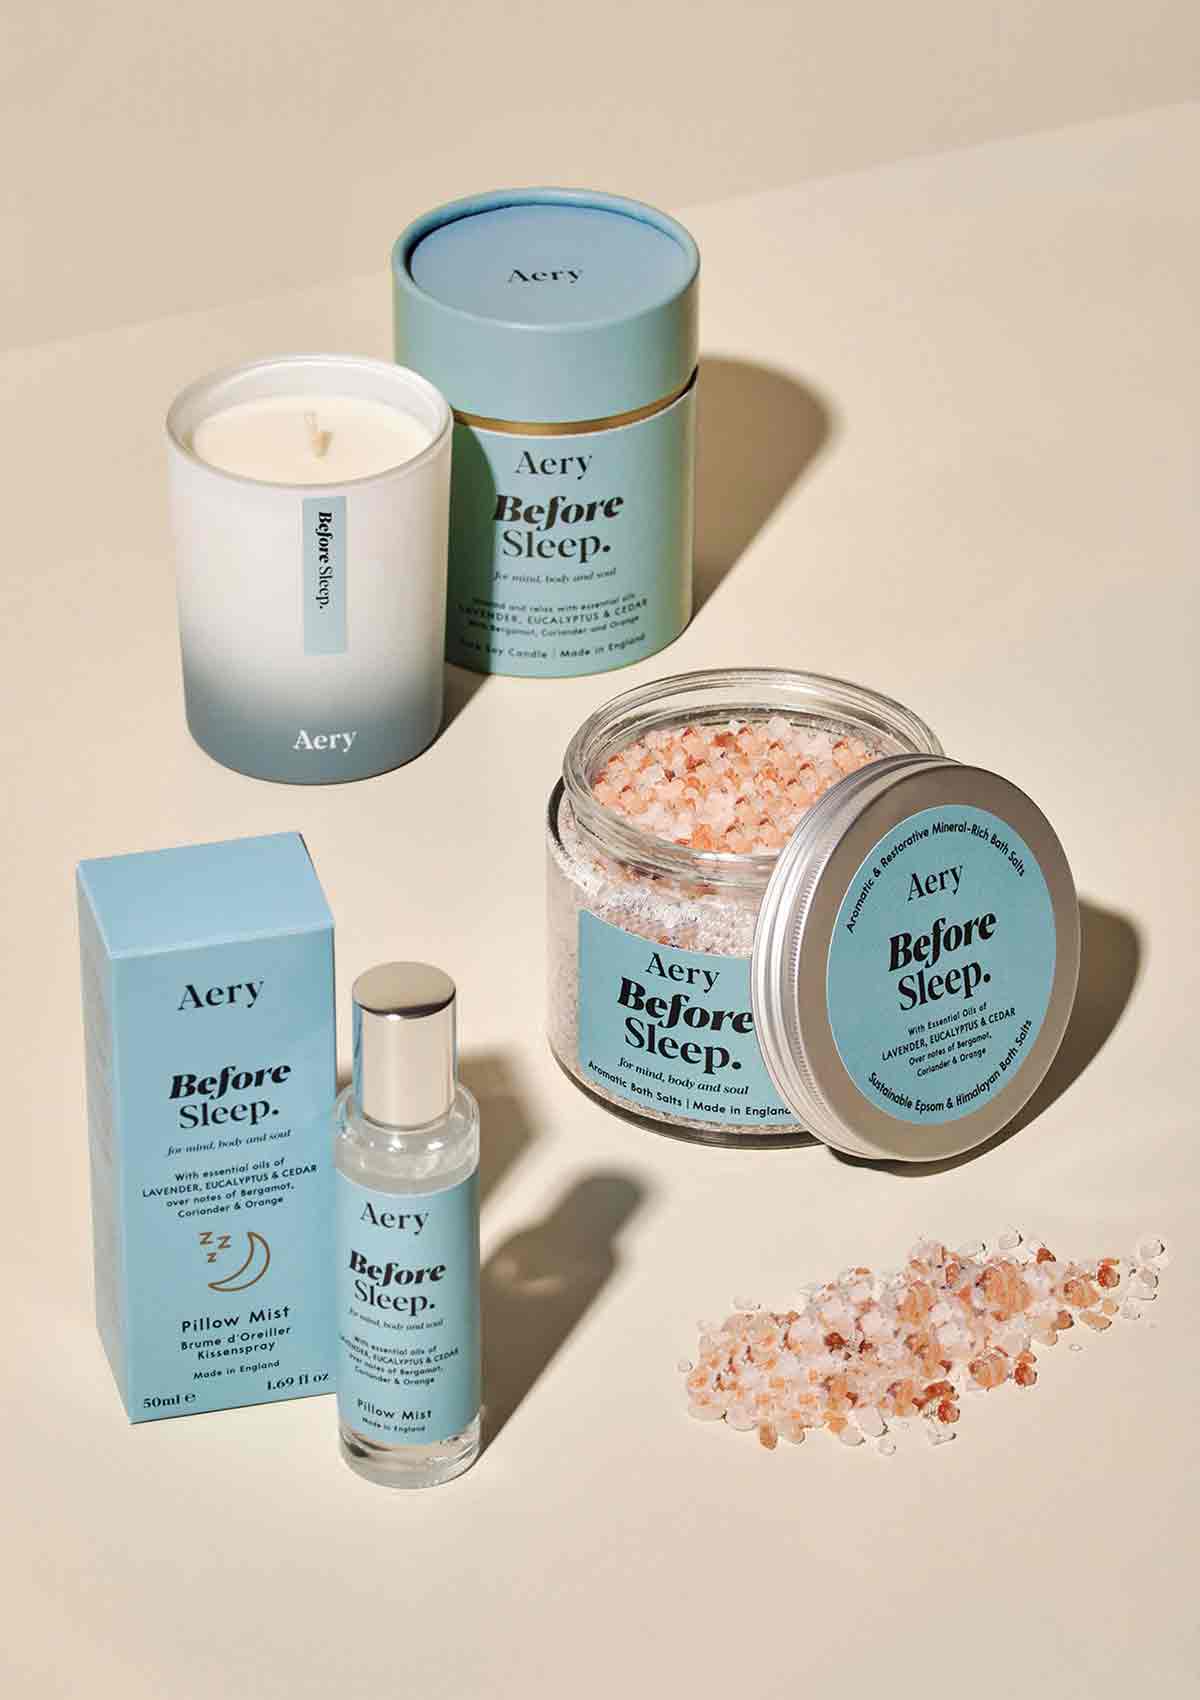 A collection of before sleep candle, pillow mist and bath salts by aery displayed with product packaging on cream background 